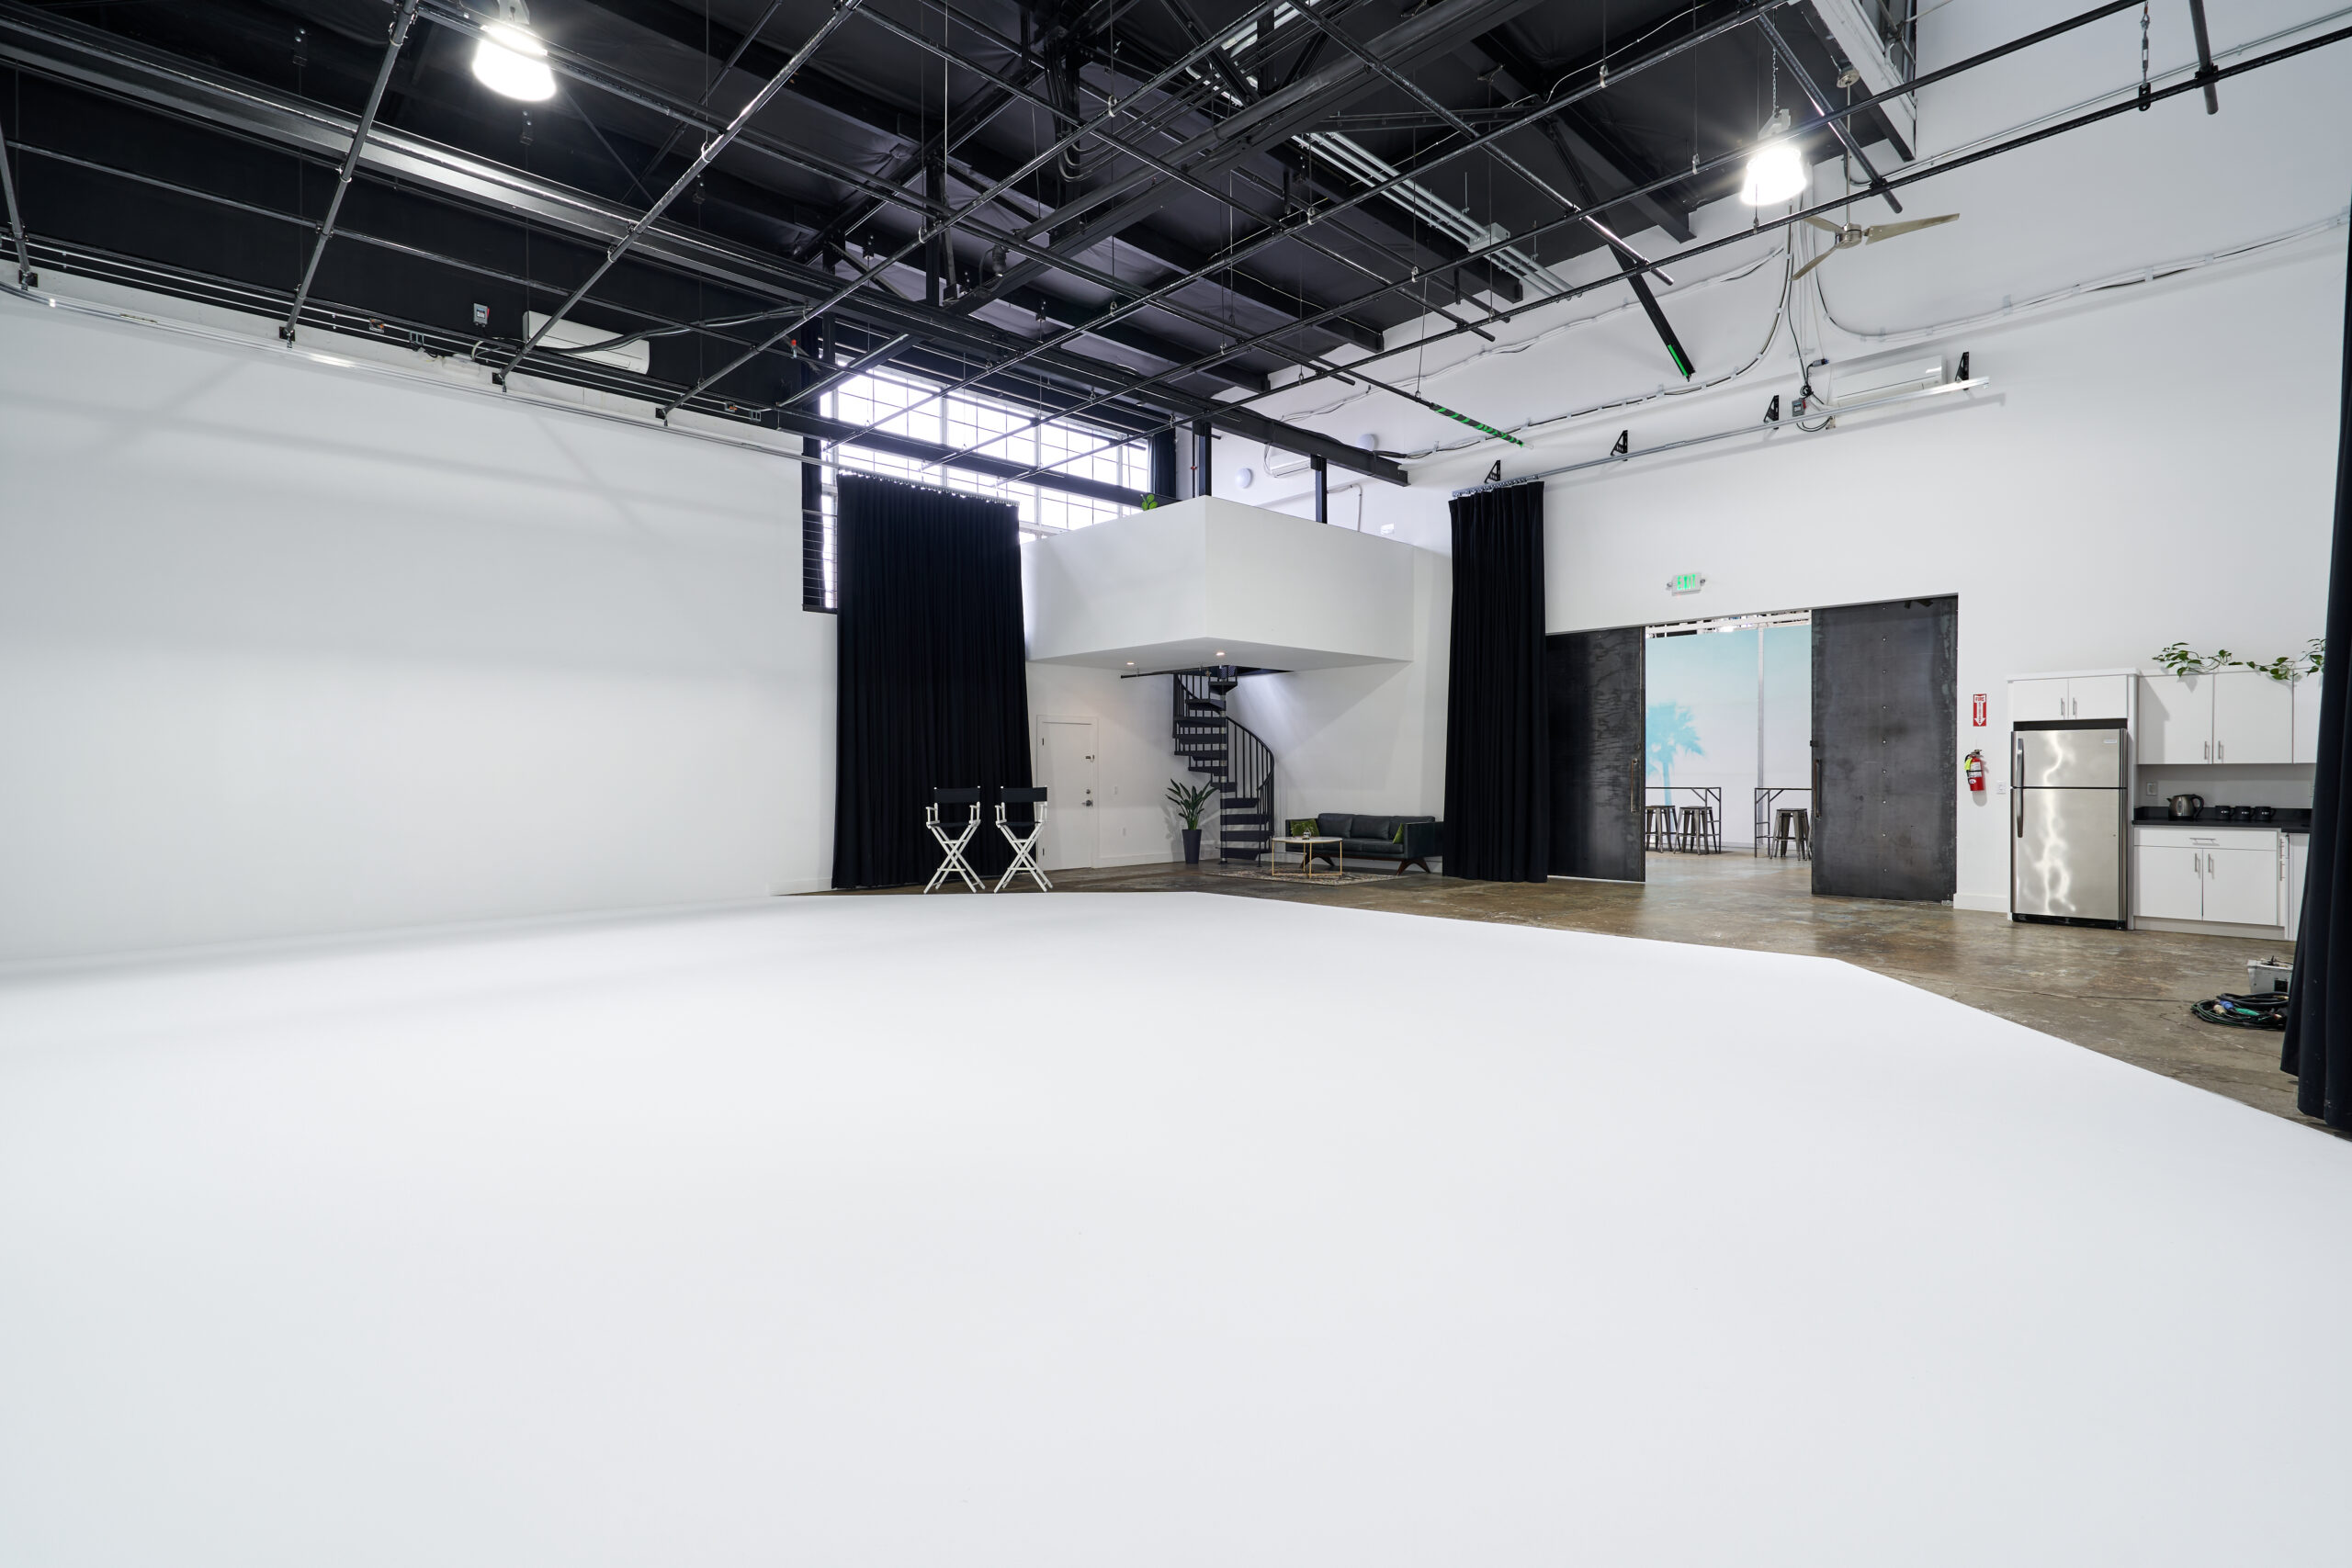 An expansive creative space studio complete with large production studio spaces